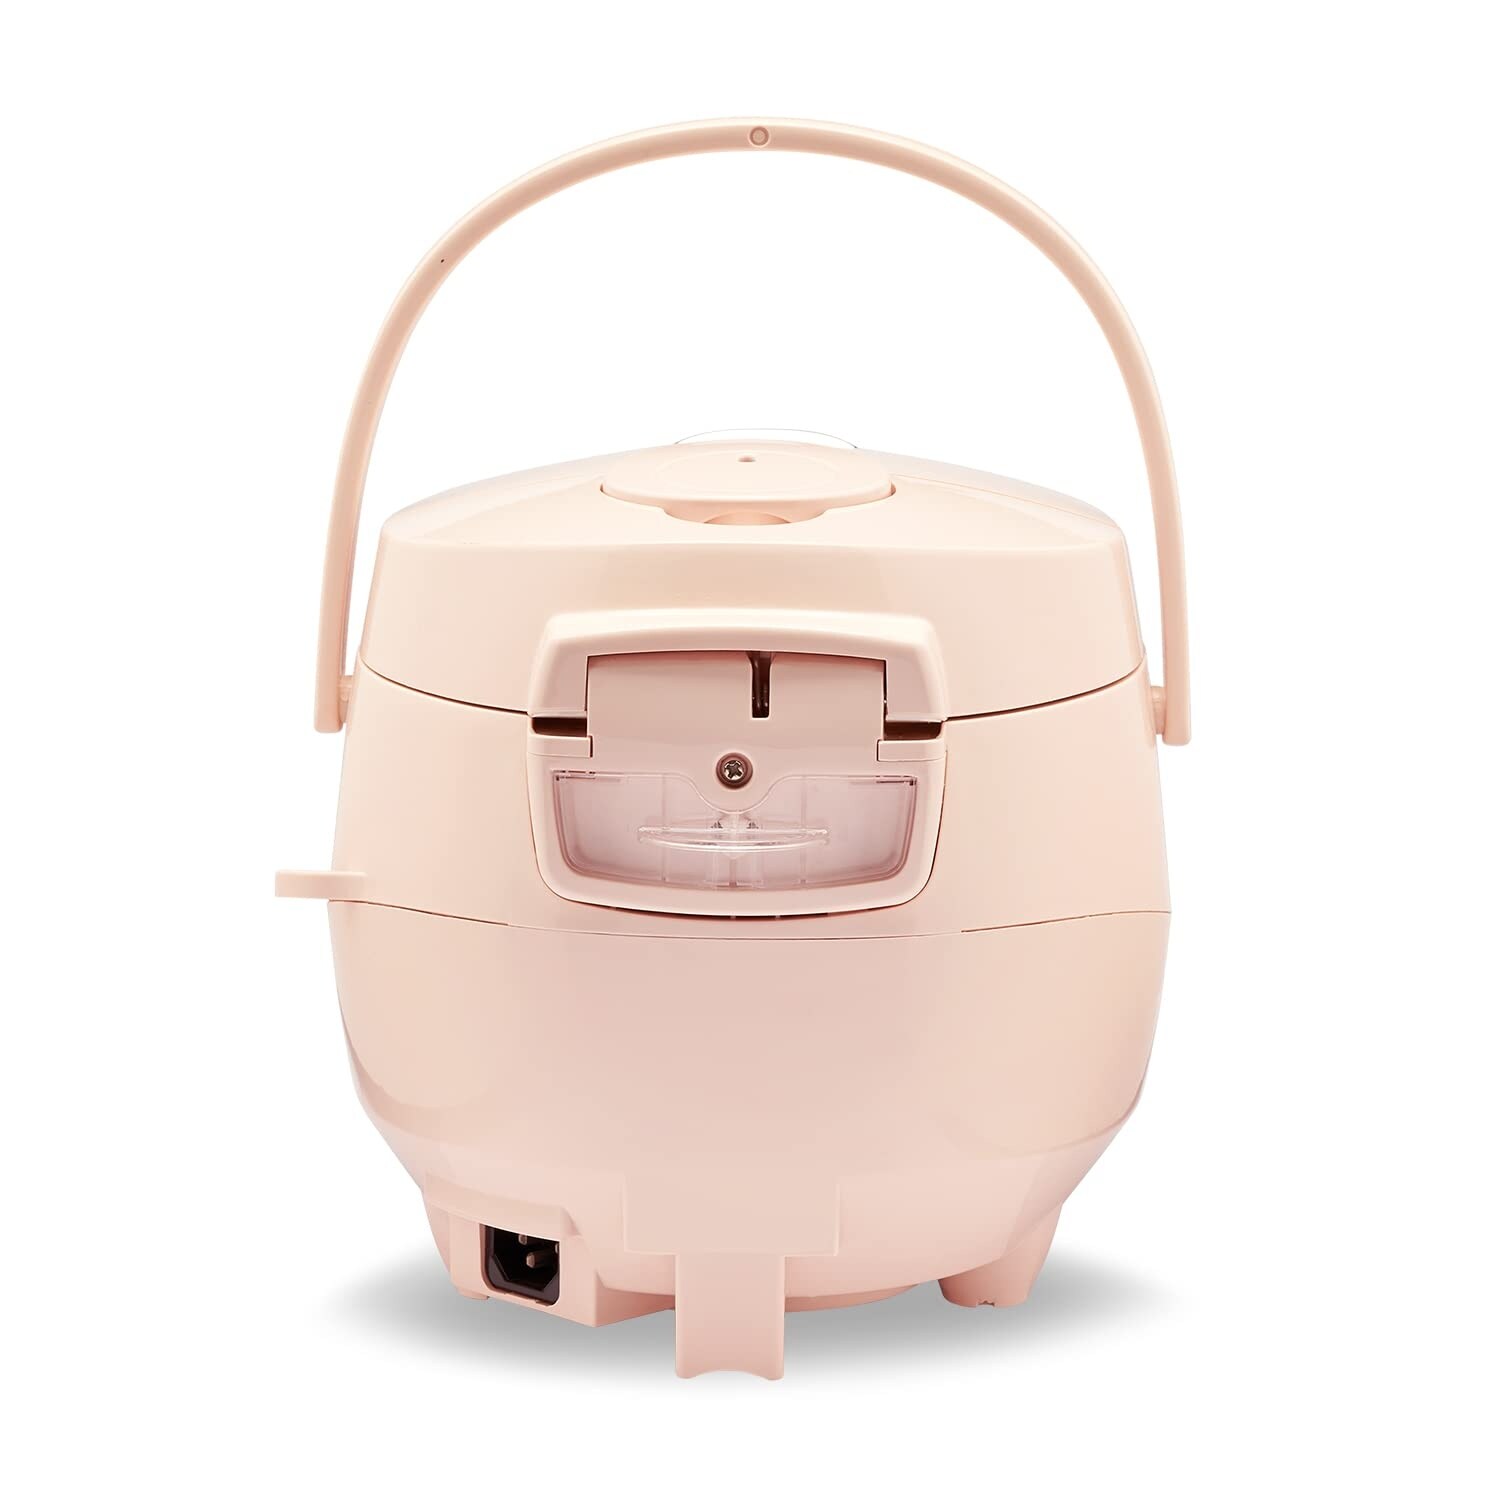 https://ak1.ostkcdn.com/images/products/is/images/direct/32ce9d9e46d661ff957c3d1e82f2b4dac47168e5/Mini-Rice-Cooker-%26-Steamer%2C-with-Keep-Warm-%26-Timer%2C-3.5-Cups-Small-Rice-Cooker-with-Ceramic-Inner-Pot%2C-8-Programs%2C-1-3-People.jpg